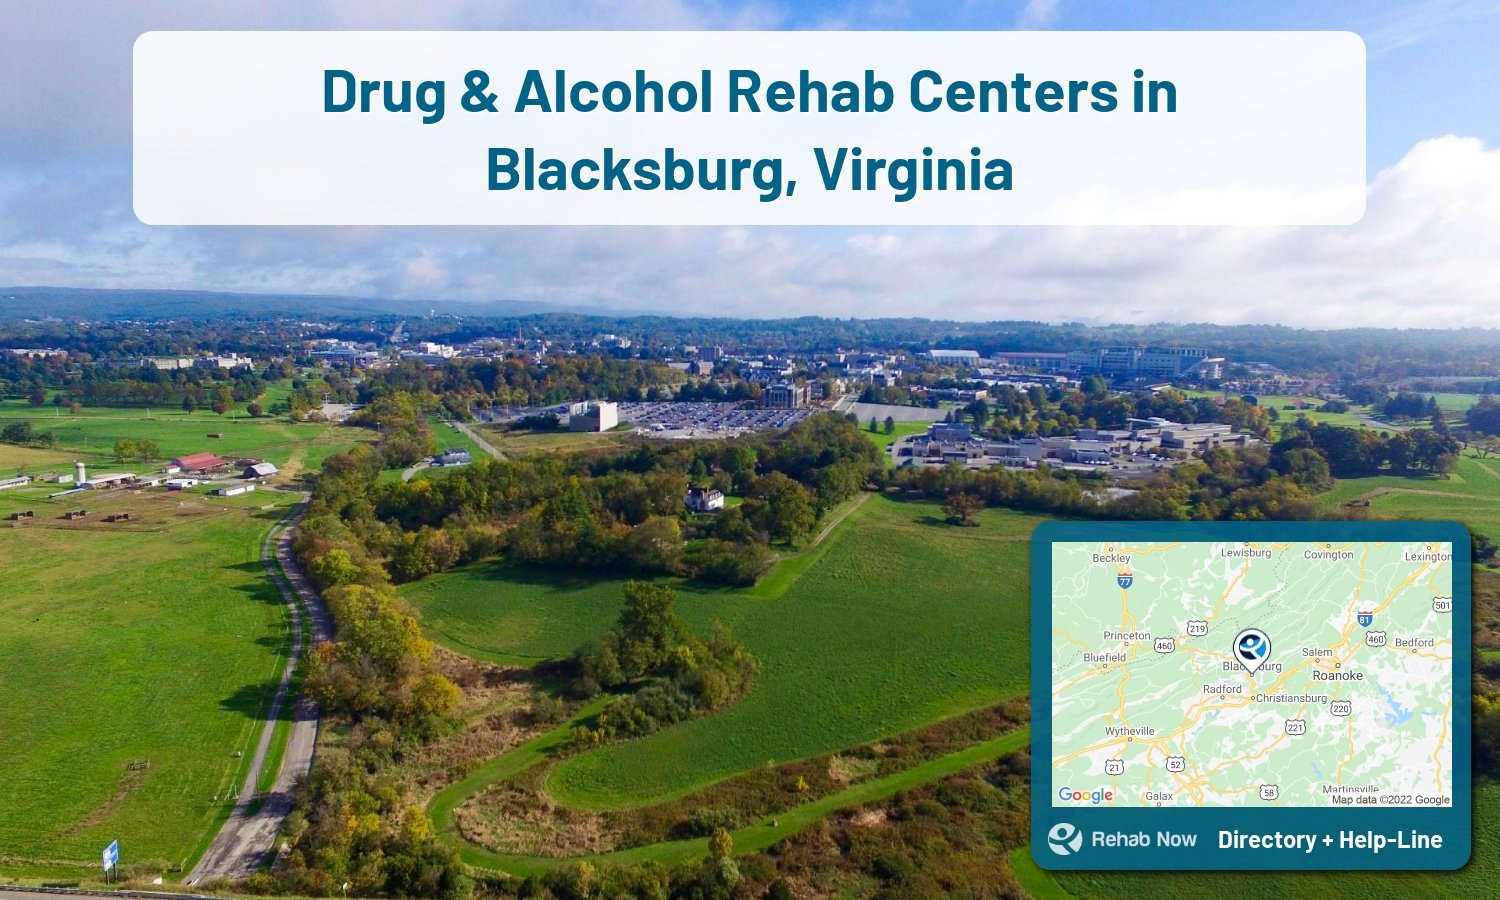 List of alcohol and drug treatment centers near you in Blacksburg, Virginia. Research certifications, programs, methods, pricing, and more.